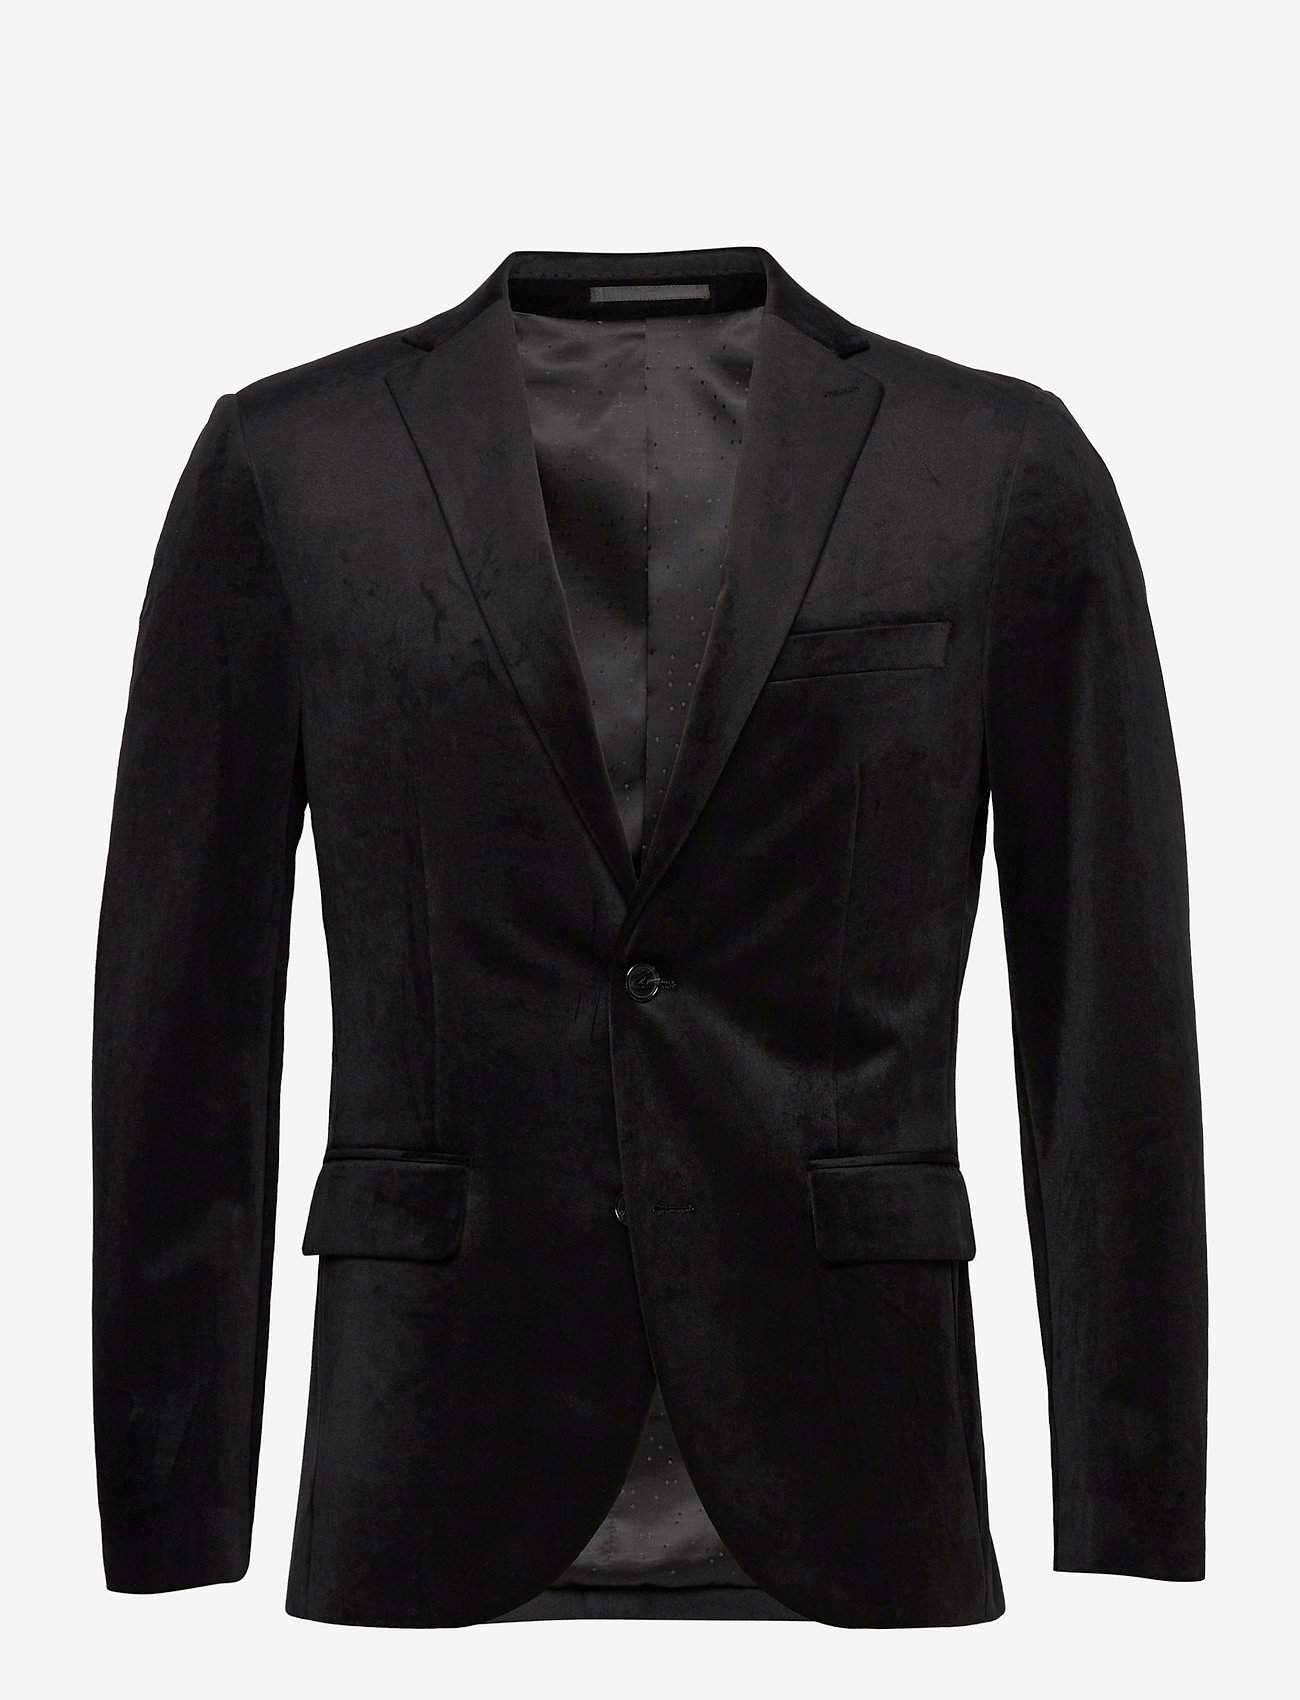 Matinique - MAgeorge F - double breasted blazers - black - 0